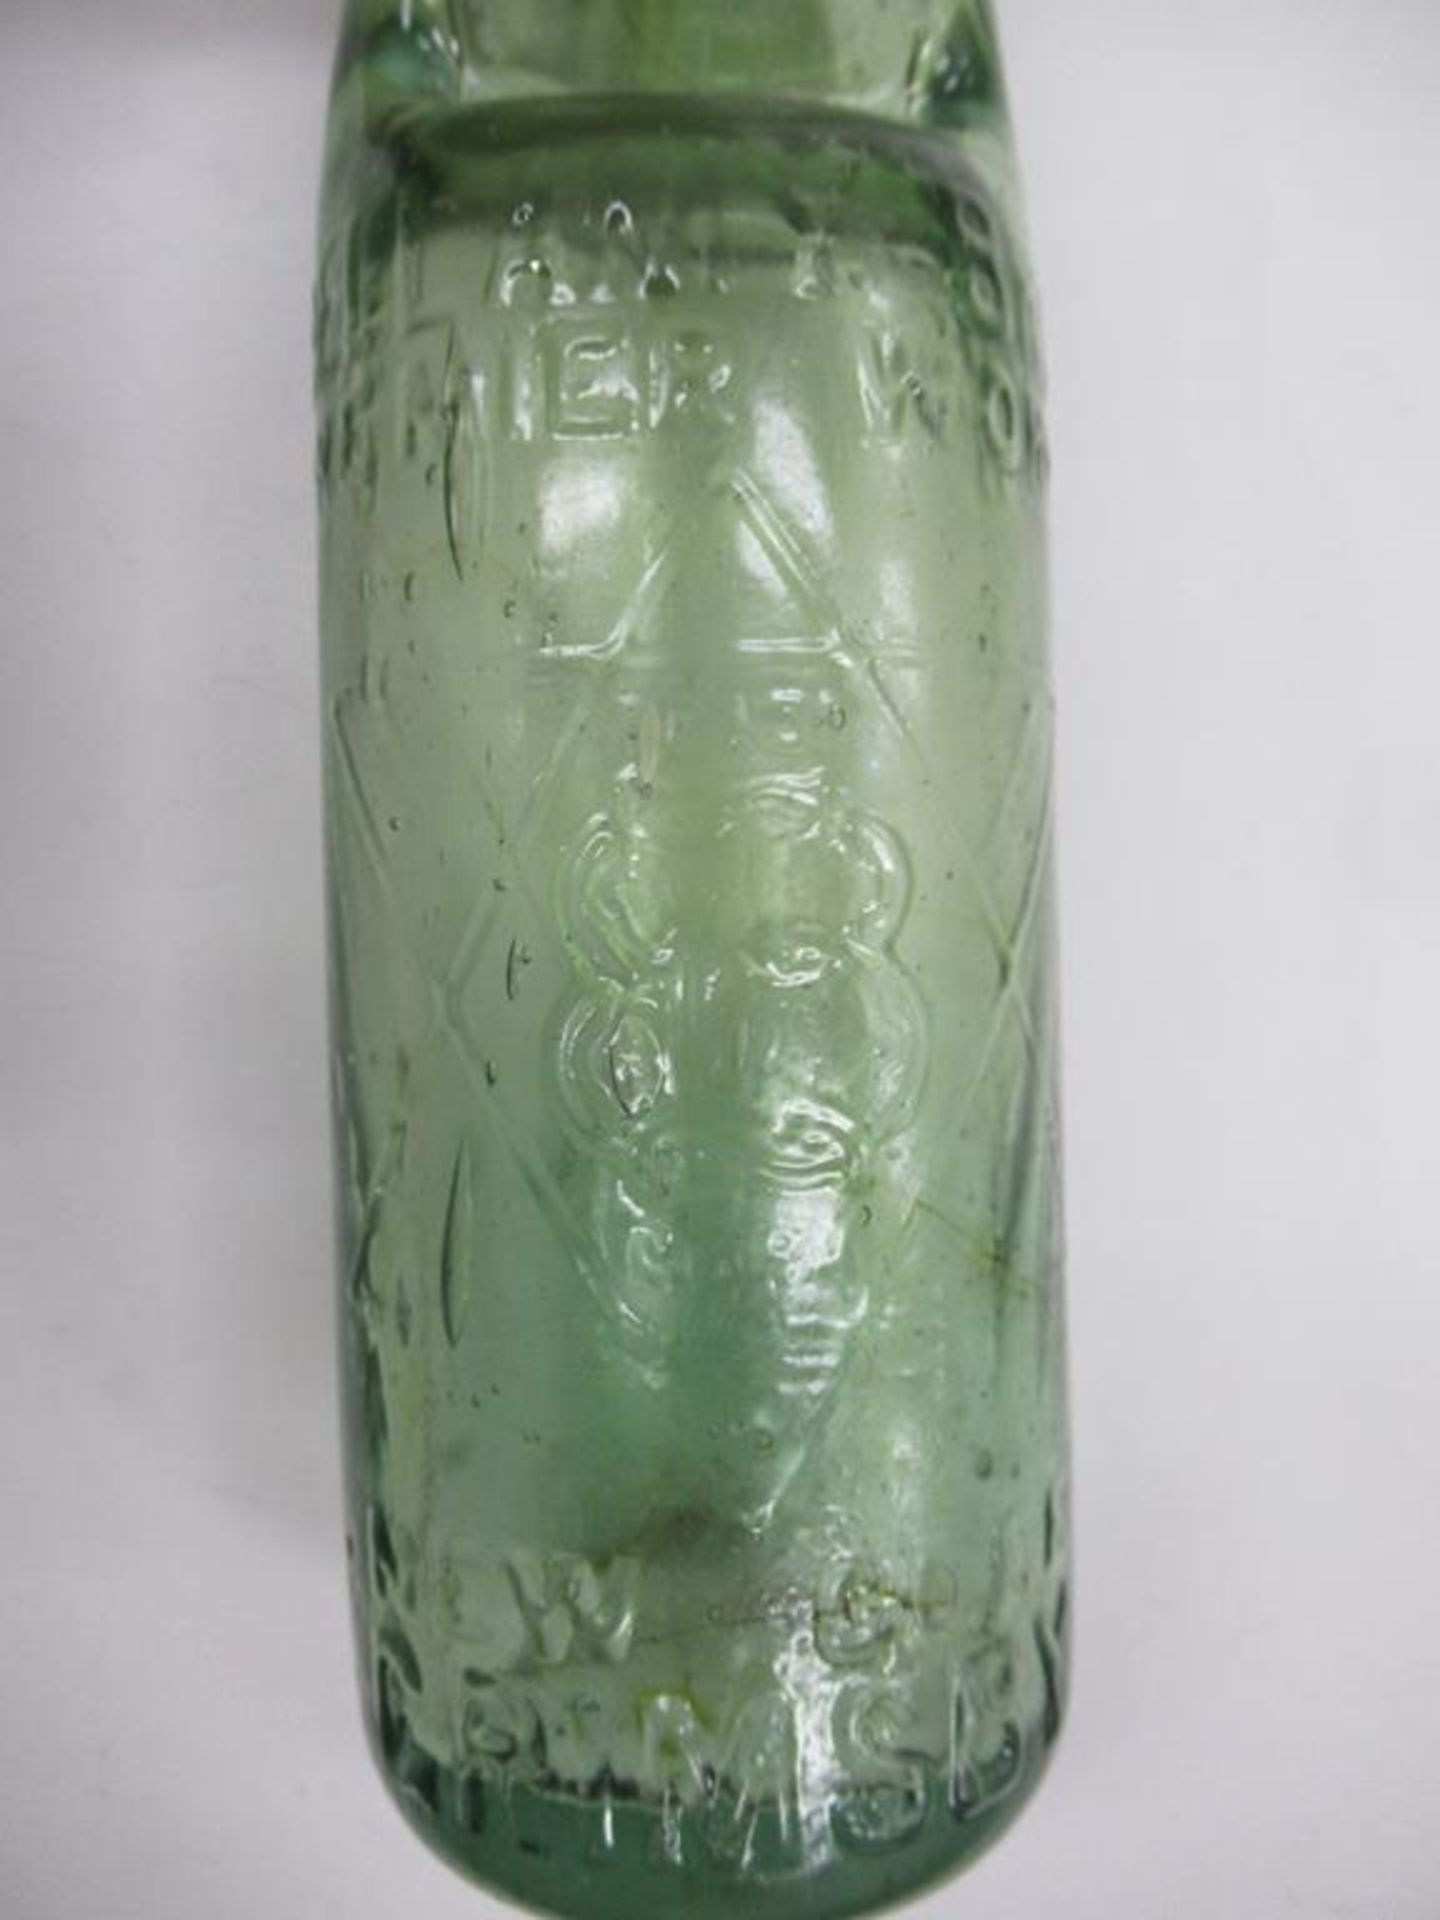 Grimsby New Clee Bellamy Bros Premier works coloured codd bottle - Image 6 of 6